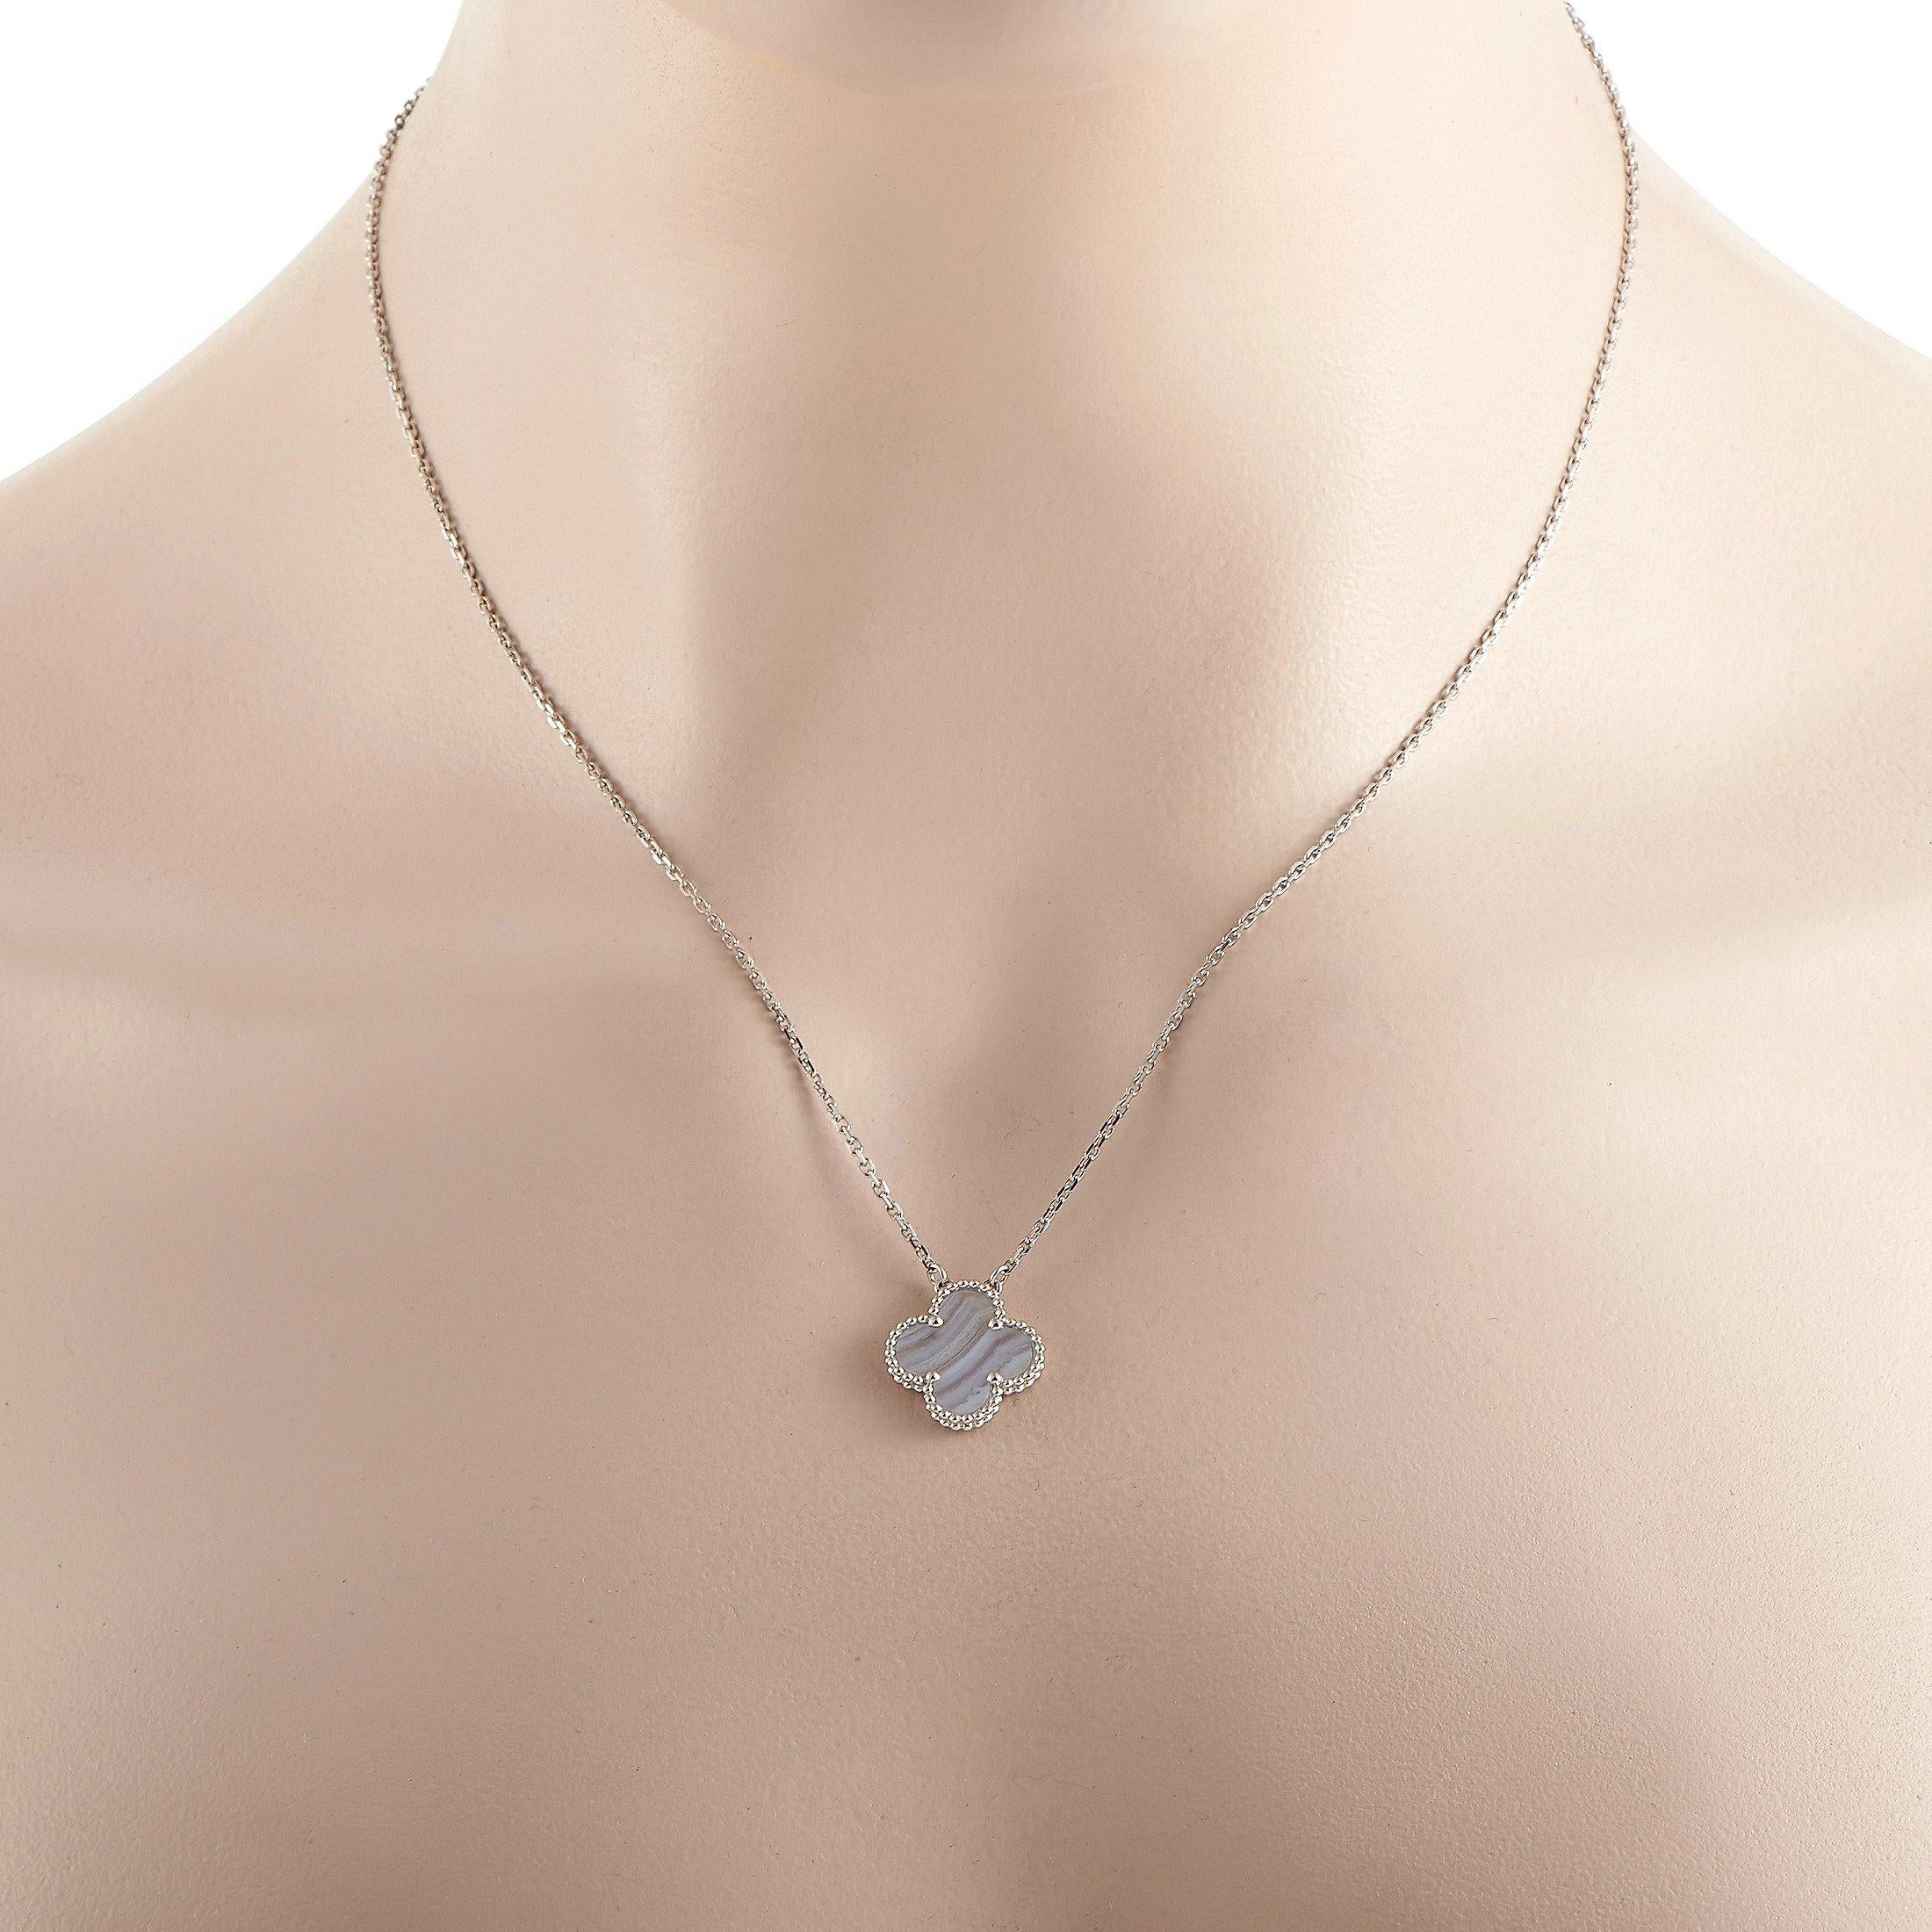 This sleek, understated necklace from Van Cleef & Arpels is incredibly chic. Suspended from an 18” chain, you’ll find the brand’s iconic Alhambra motif made from 18K White Gold and Chalcedony. The pendant measures 0.65” round and will always make a